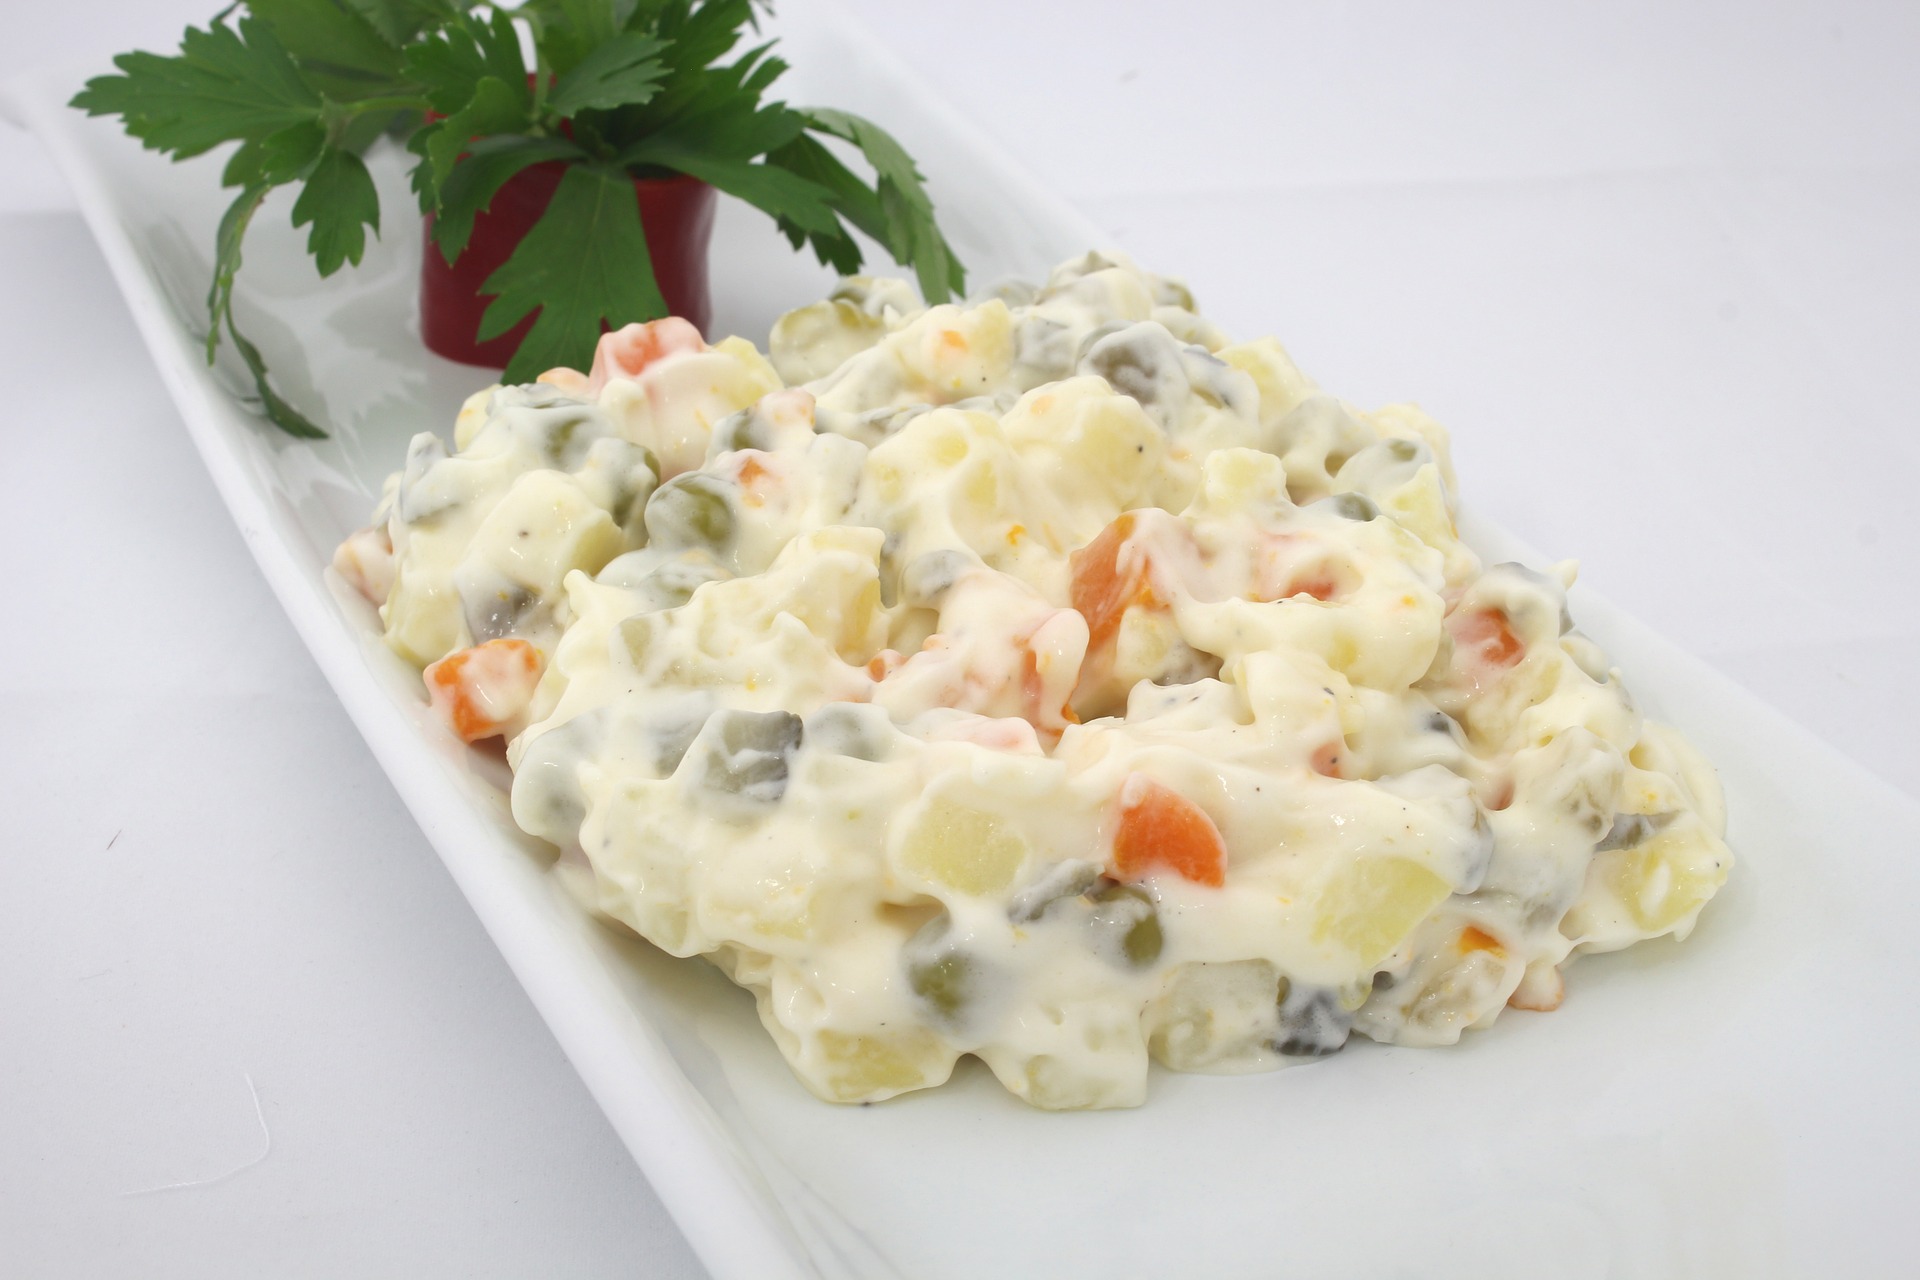 Mixed Vegetable with Mayo Salad Recipe